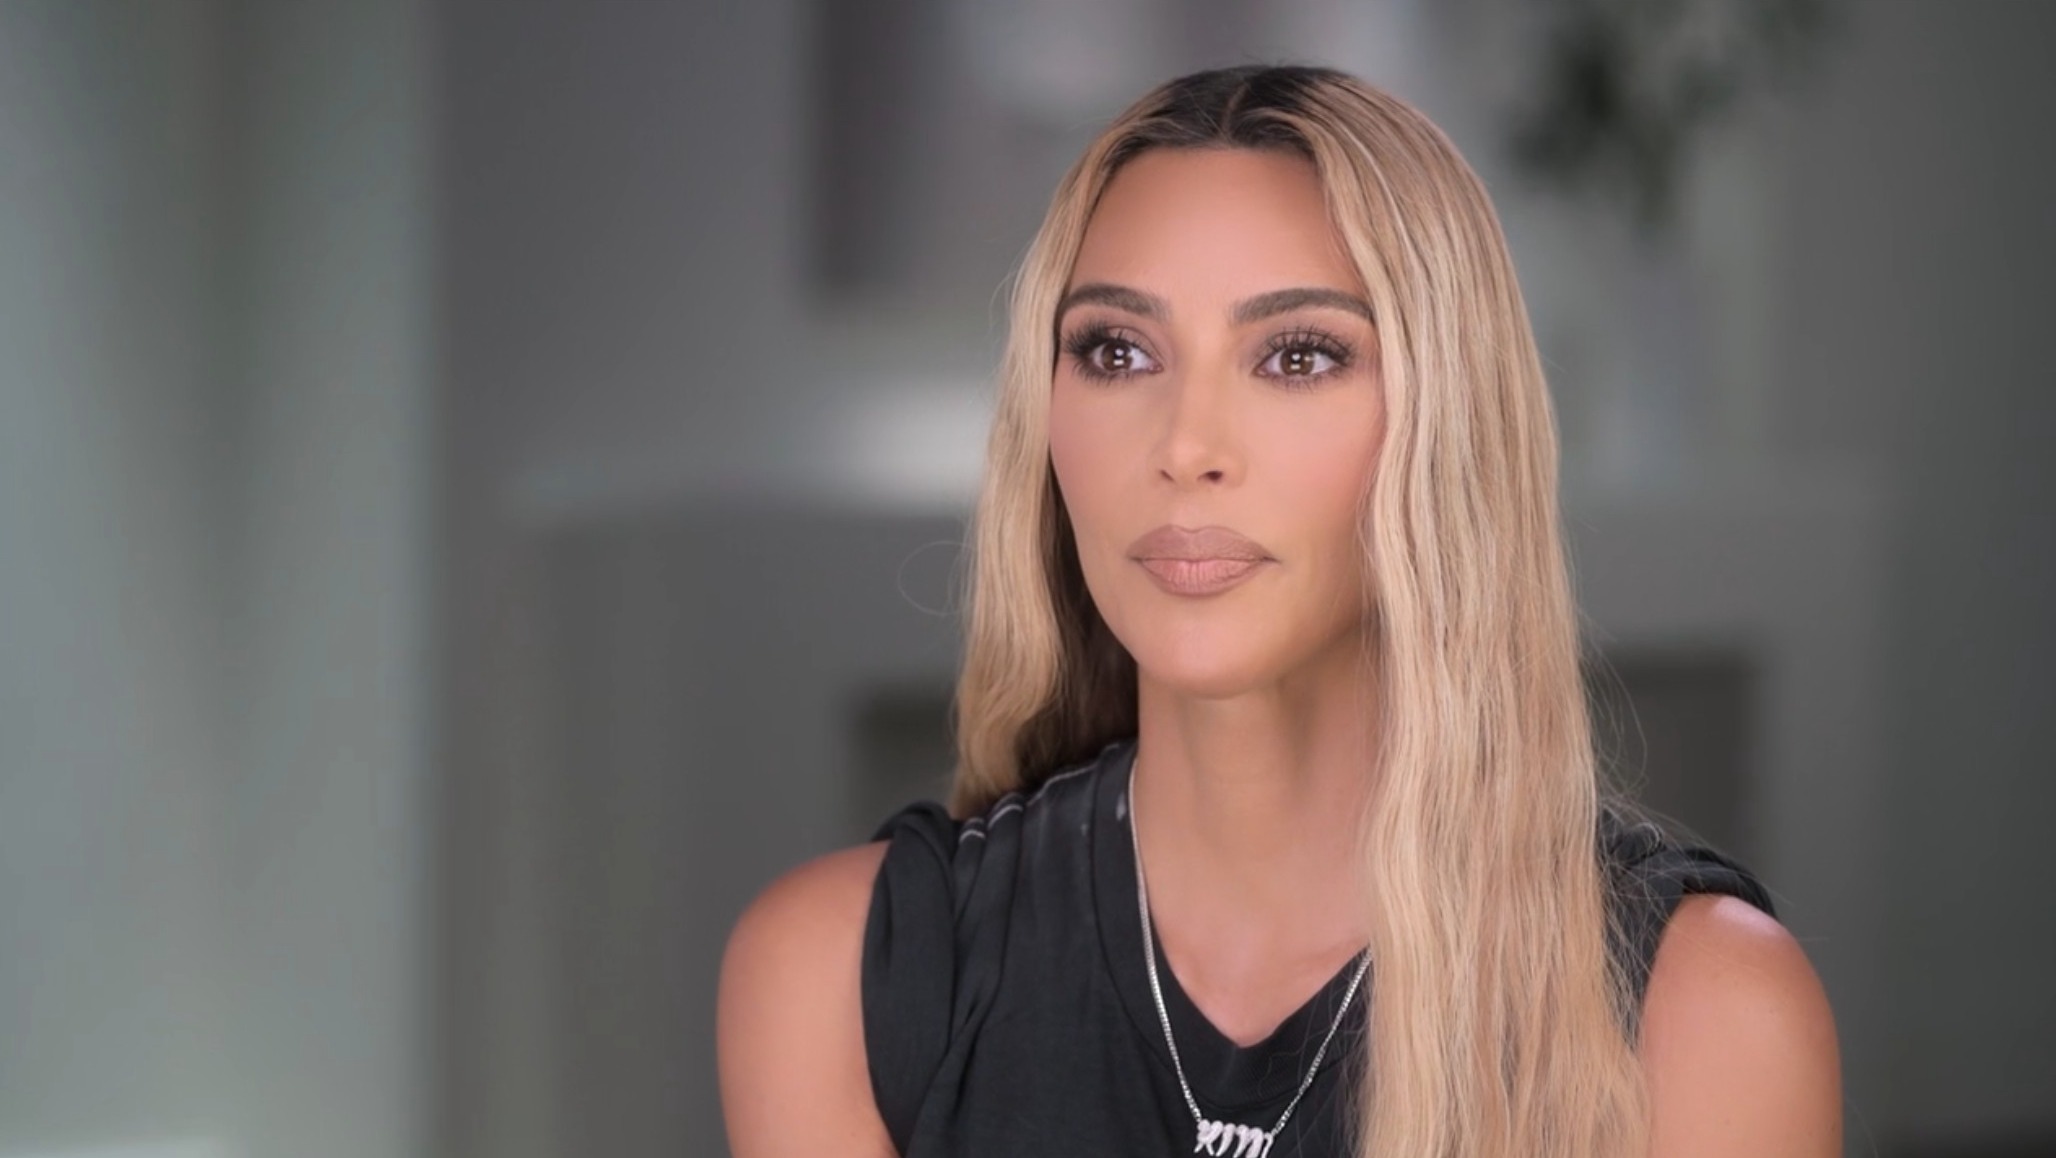 On The Kardashians, Kim was unrecognizable after she slept in her makeup